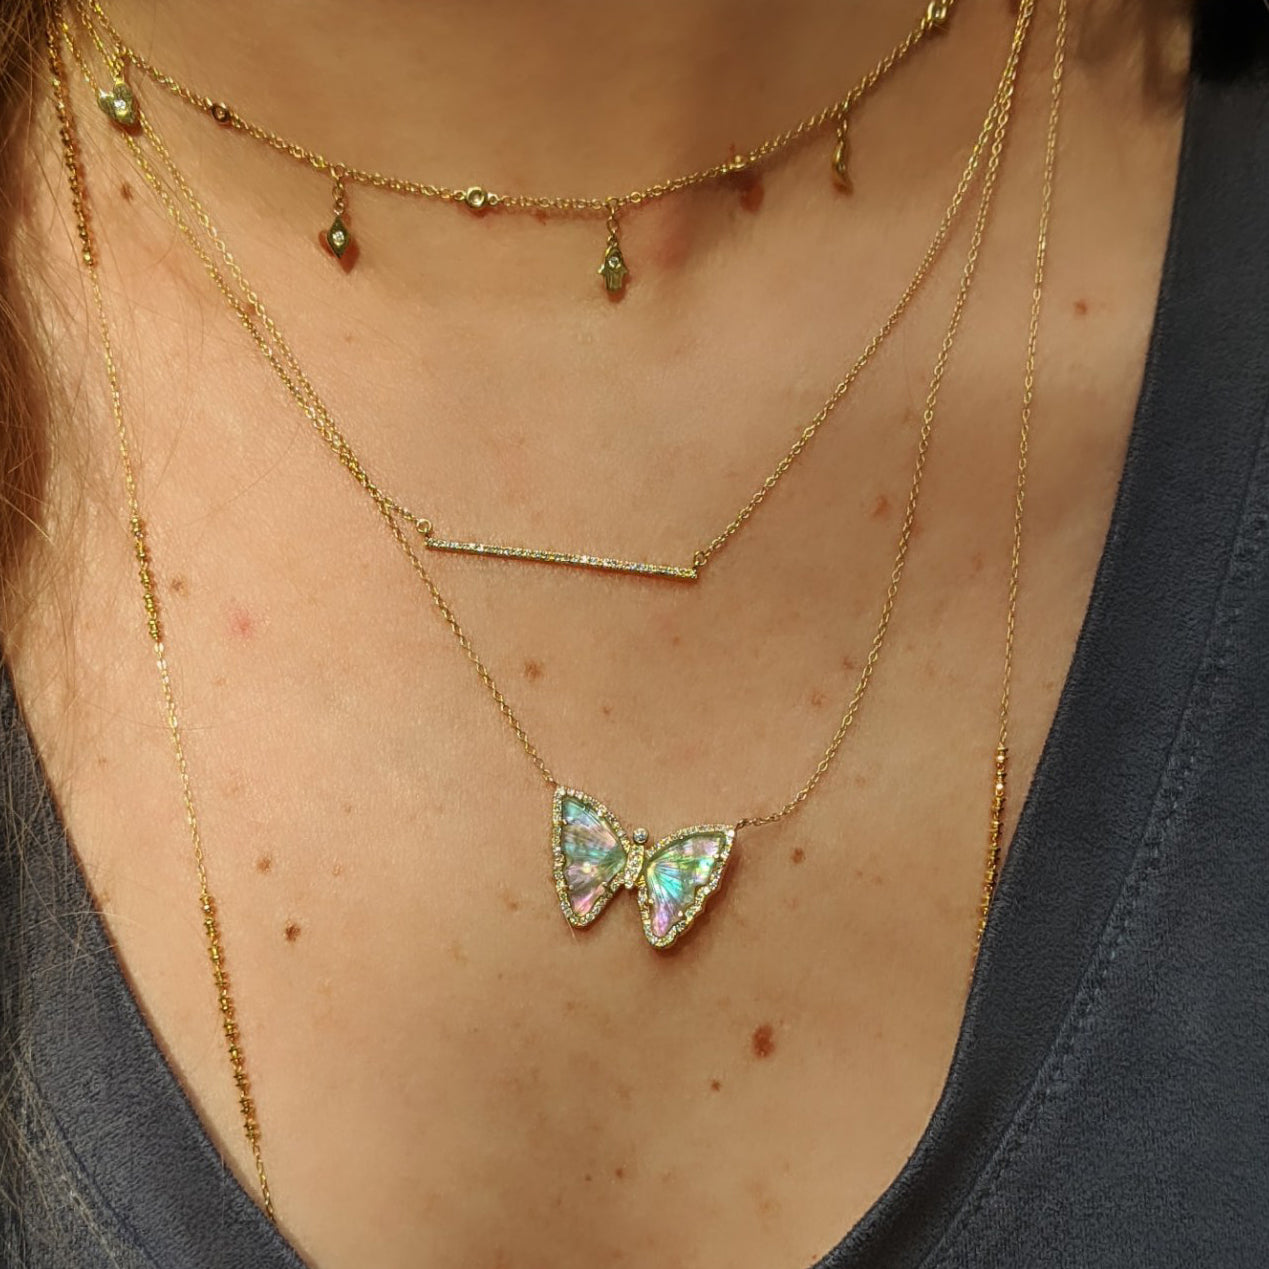 Fairy Tourmaline Butterfly Necklace With Pearl and Diamonds in 14k Gold